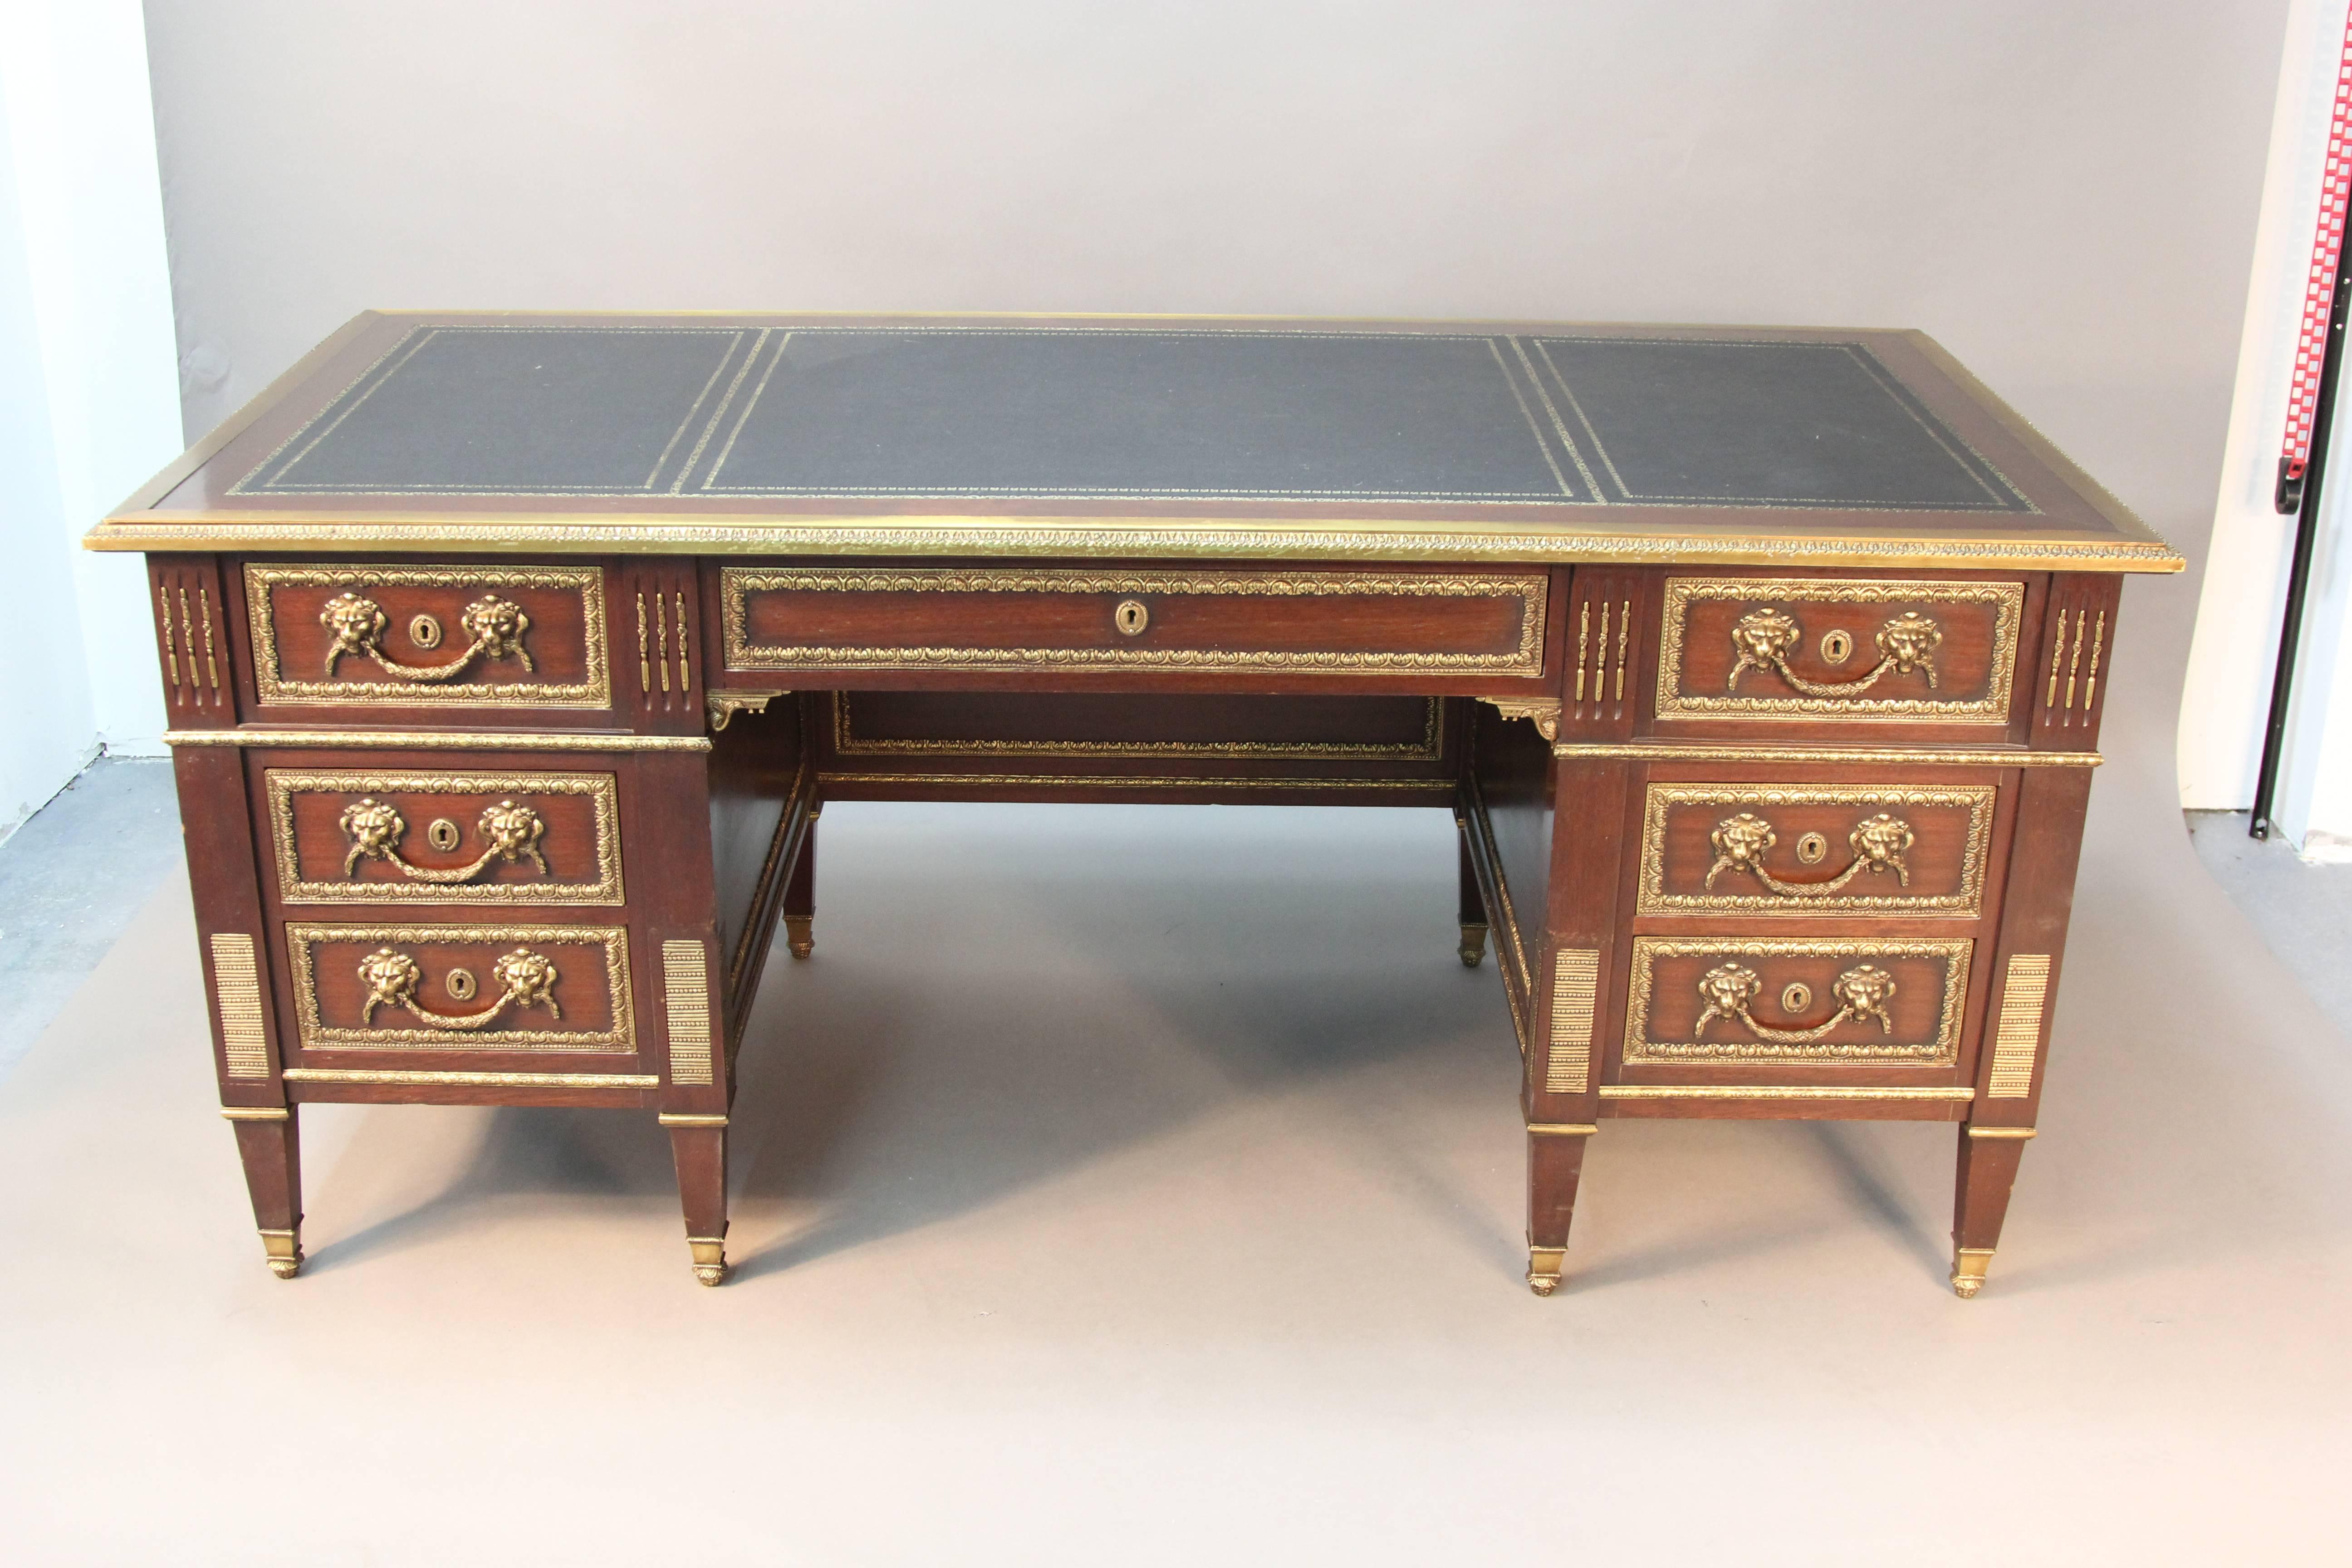 A large antique French executive desk adorned with gilt bronze mounts and figurative animal head drawer pulls. Gilt embossed leather top.  Very finely cast dore bronze mounts.